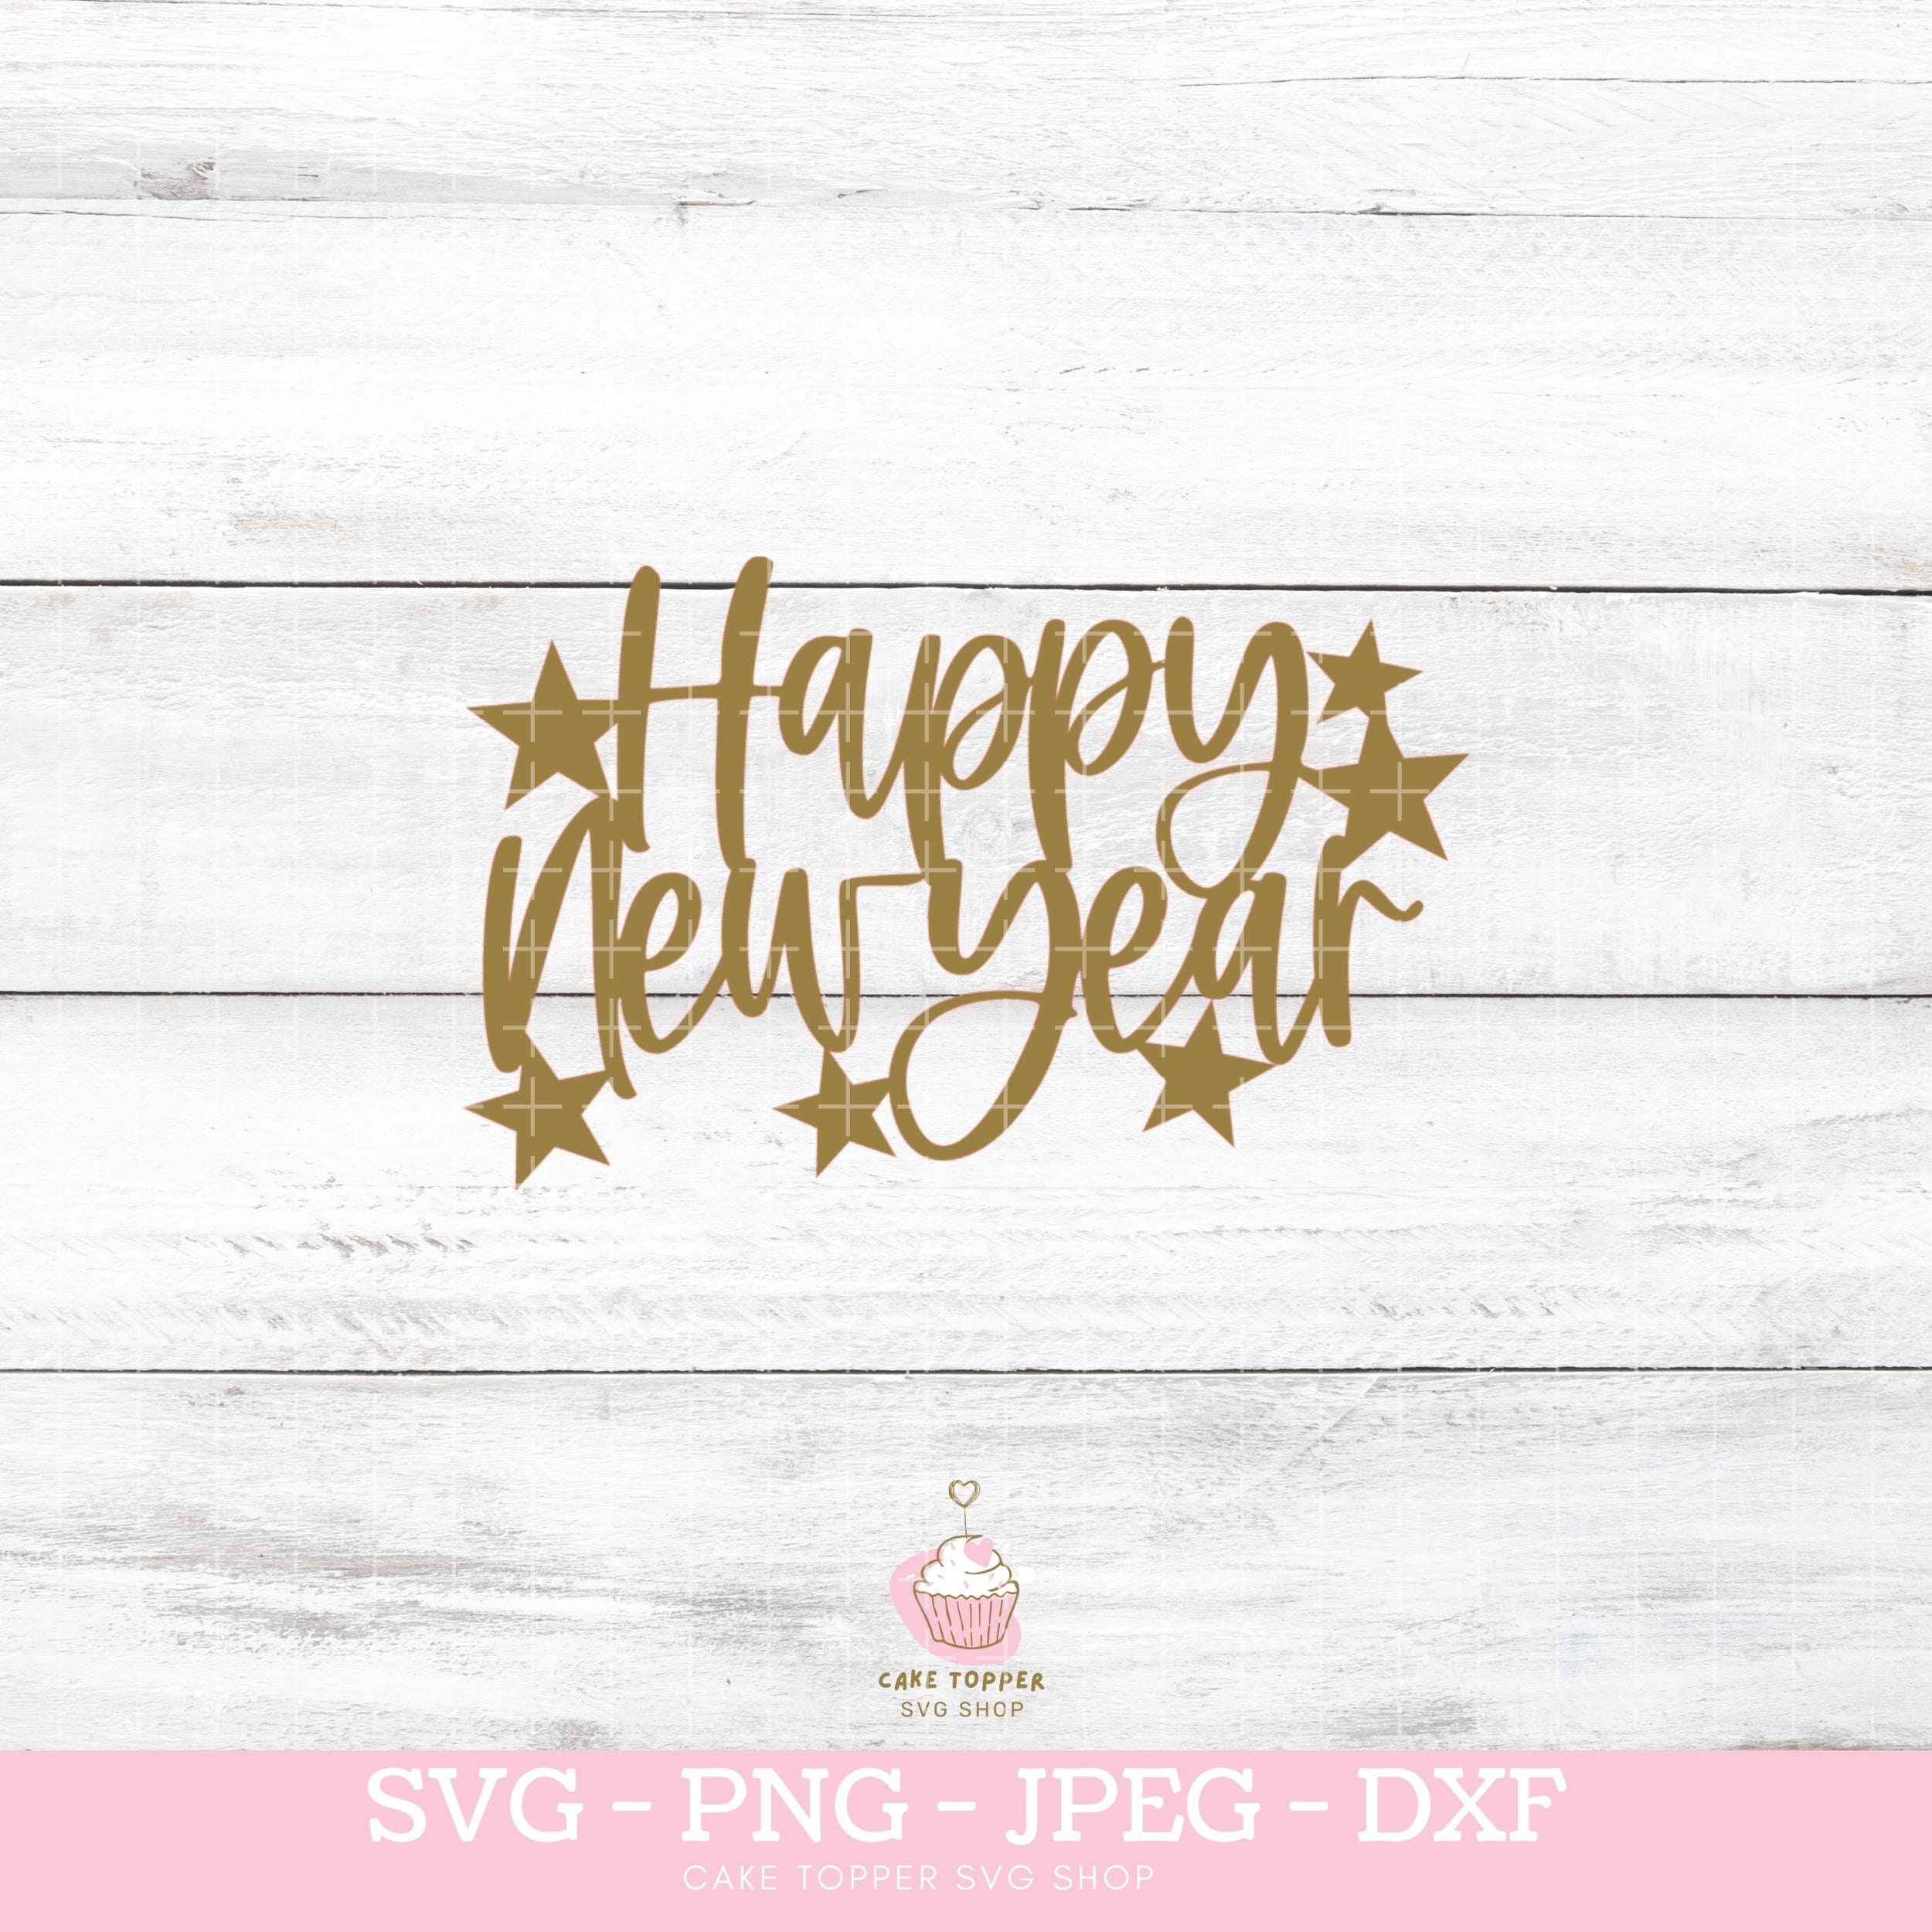 Happy New Year cake topper SVG